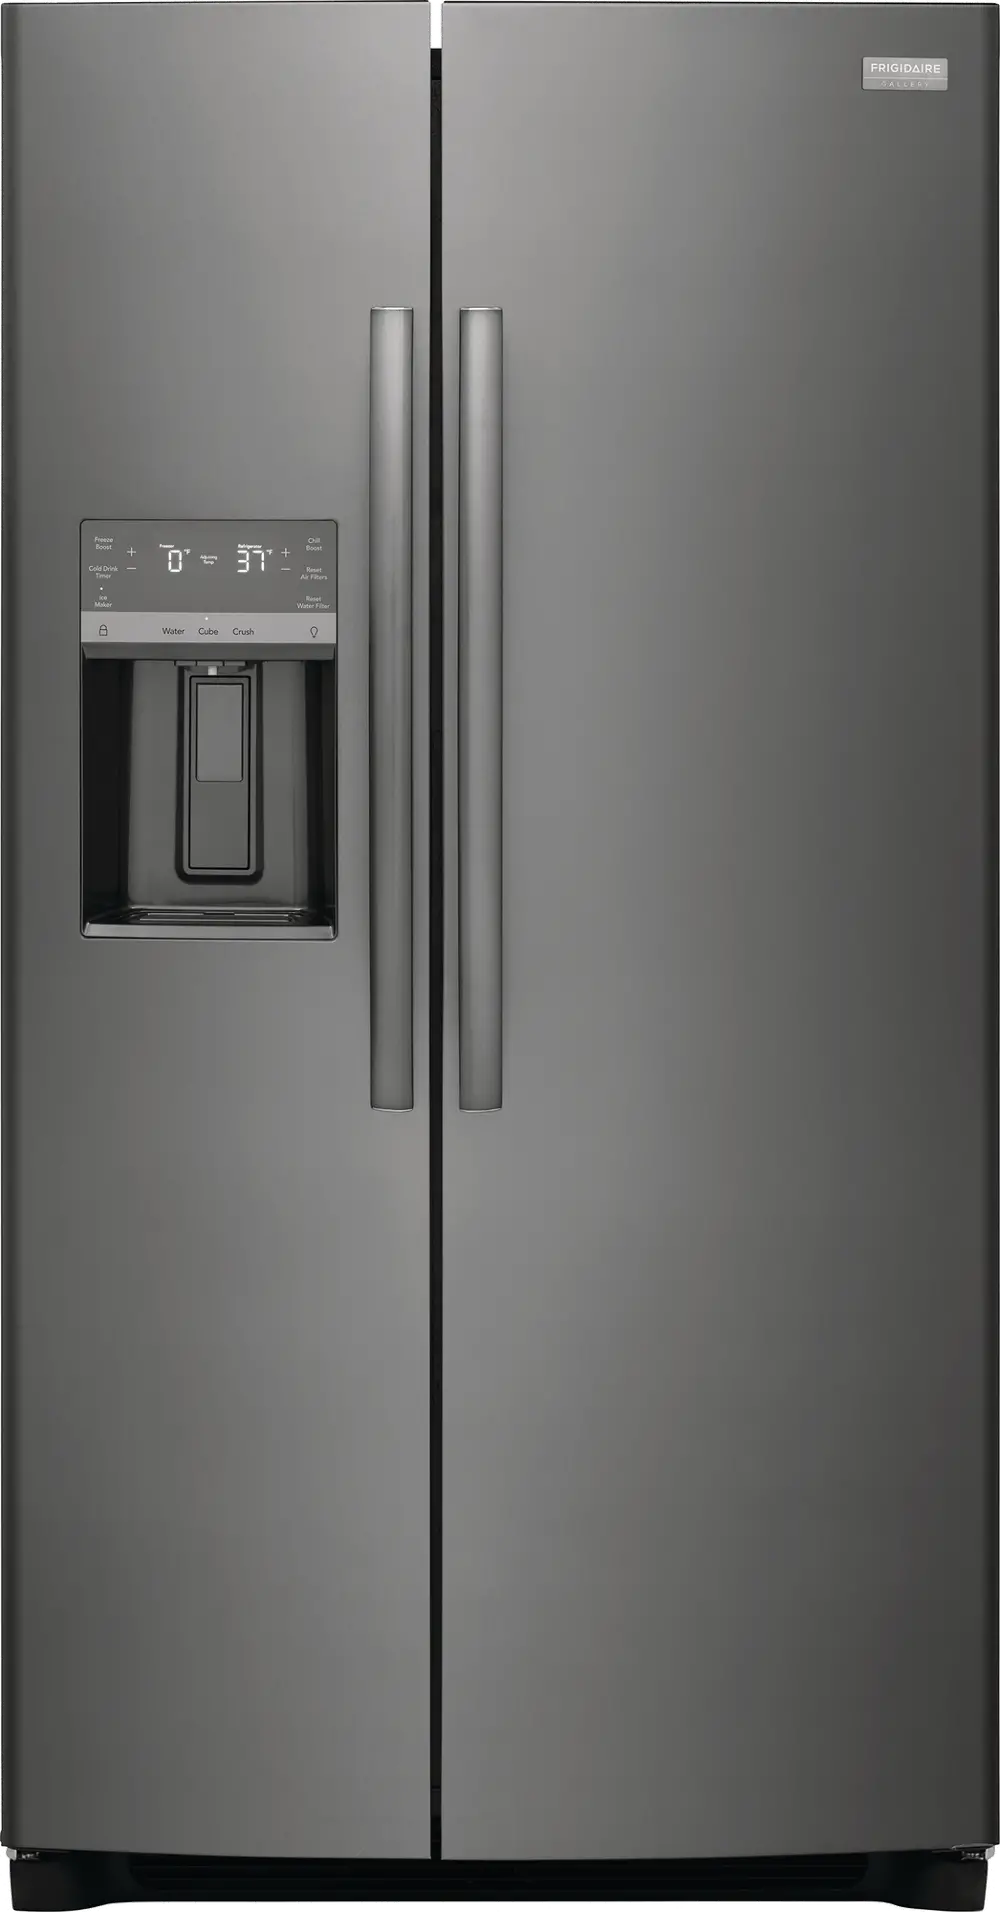 GRSS2652AD Frigidaire Gallery 25.6 cu ft Side by Side Refrigerator - Black Stainless Steel-1